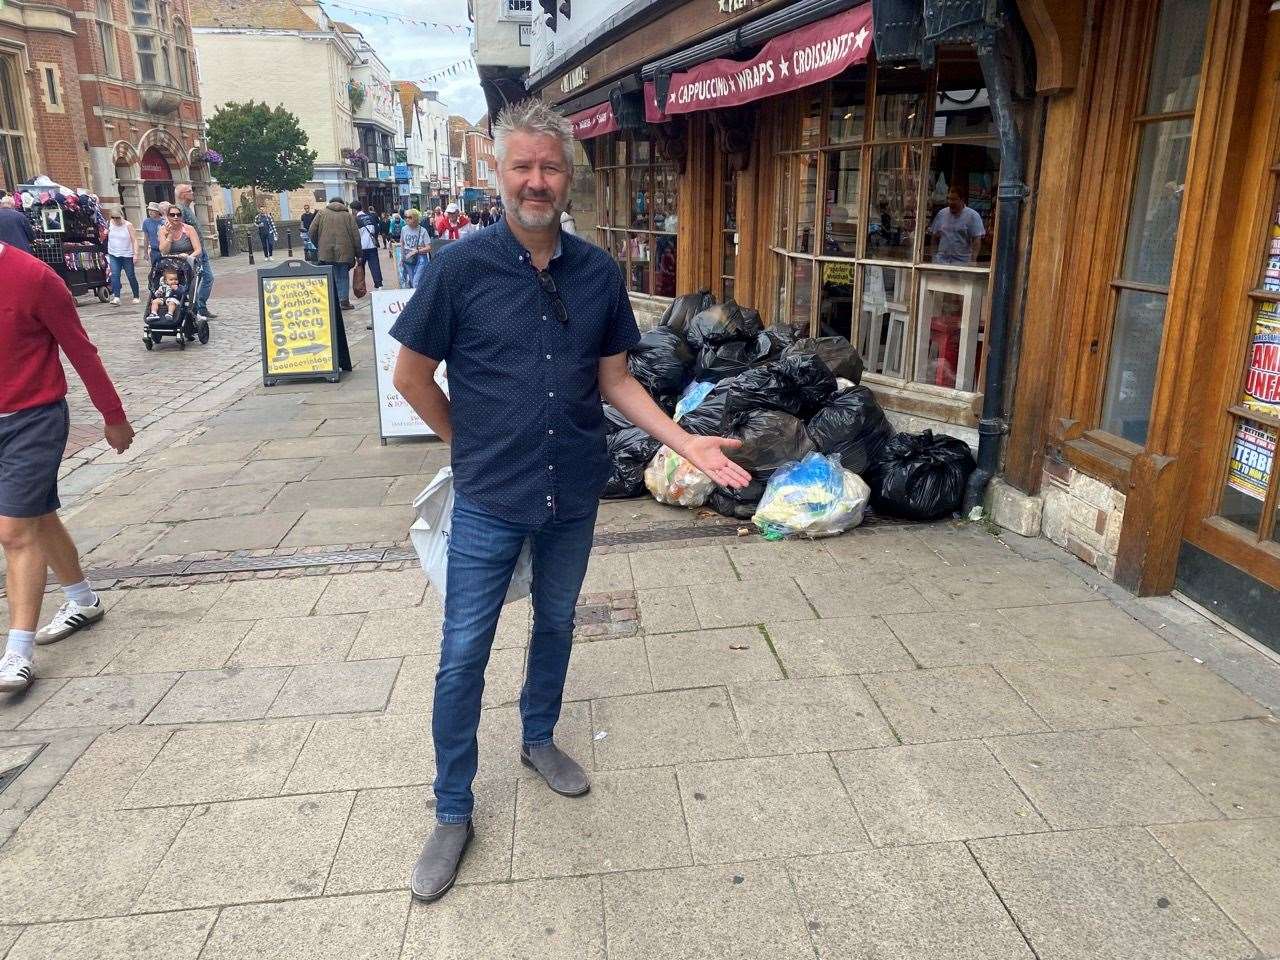 Roger Hawkins mistook Pret A Manger for a charity shop on Monday morning because of the piles of black sacks outside